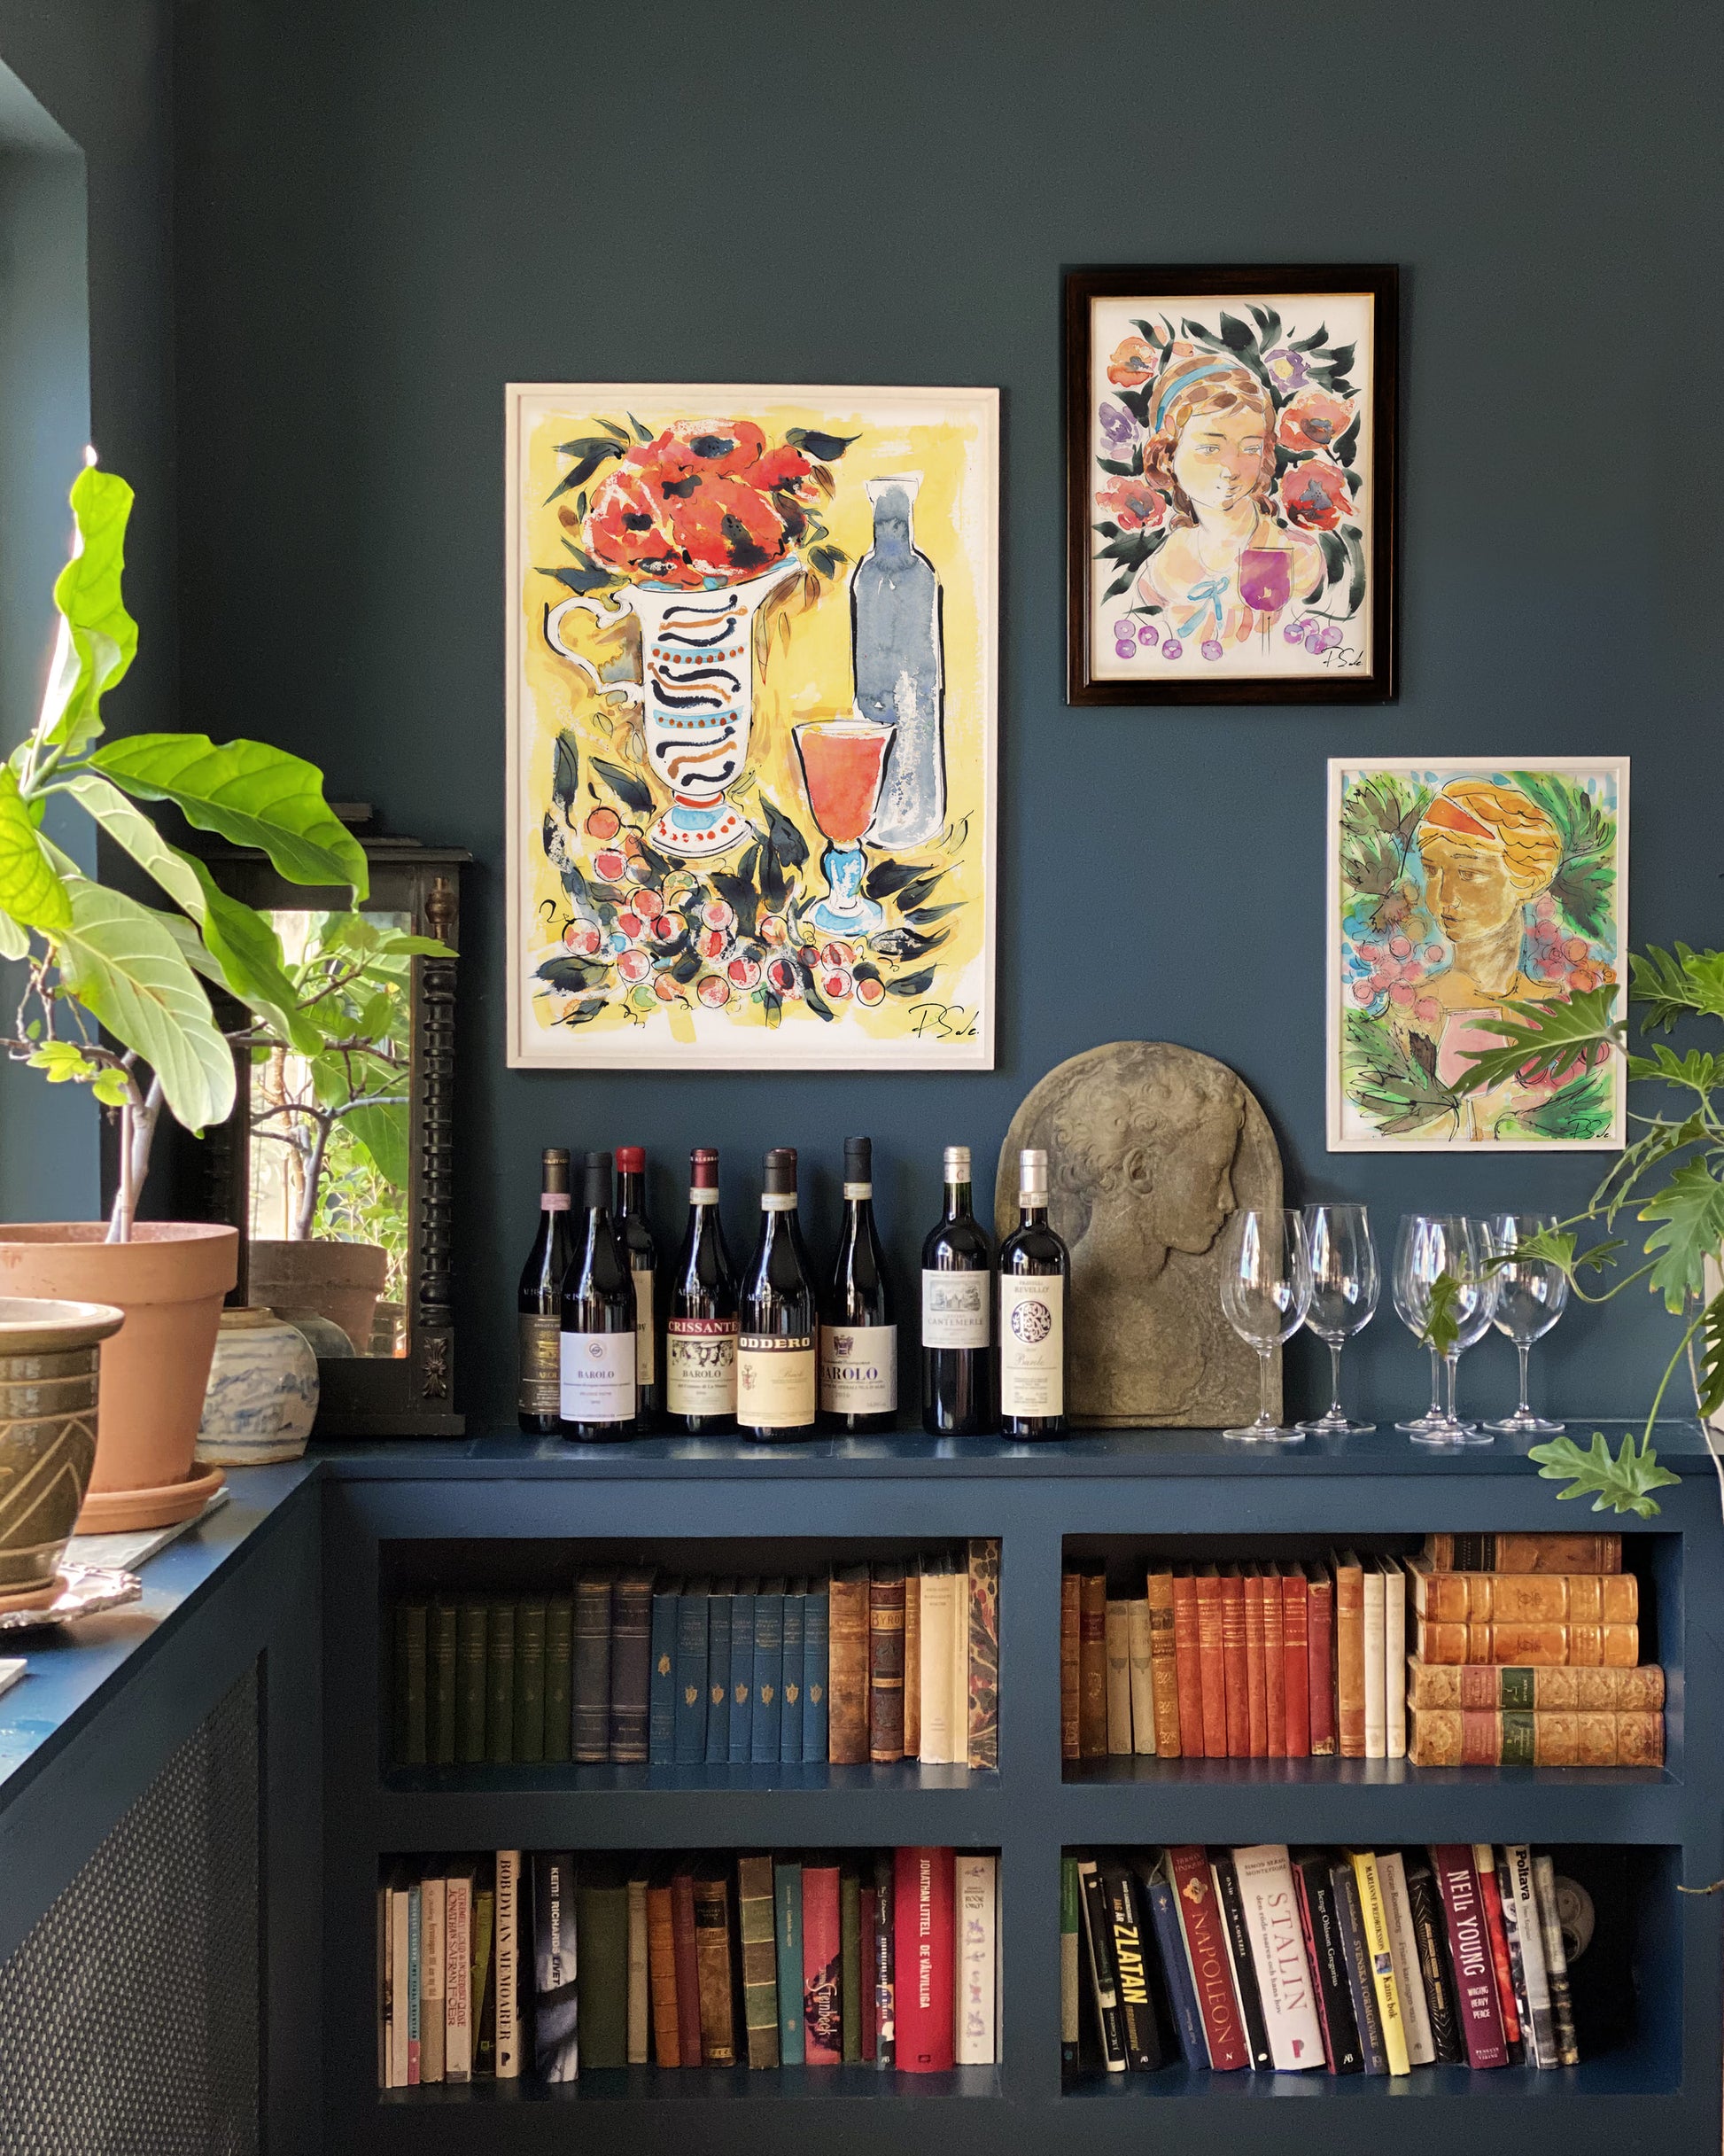 Exclusive wine art posters created by artists in collaboration with Brushery. Premium quality wine art prints printed on environmentally friendly FSC marked paper.